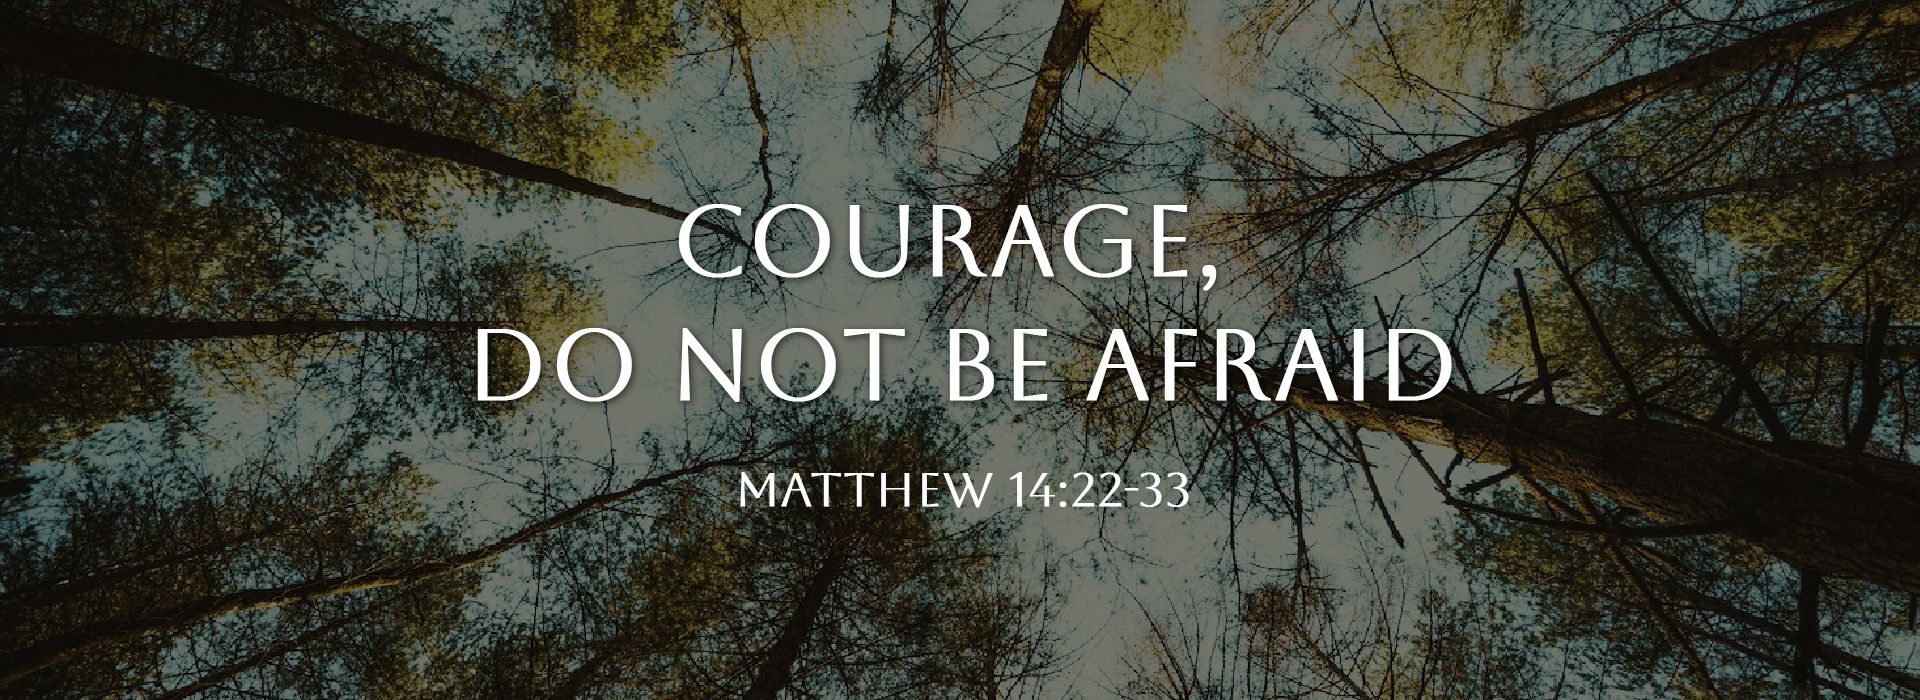 Courage, do not be afraid